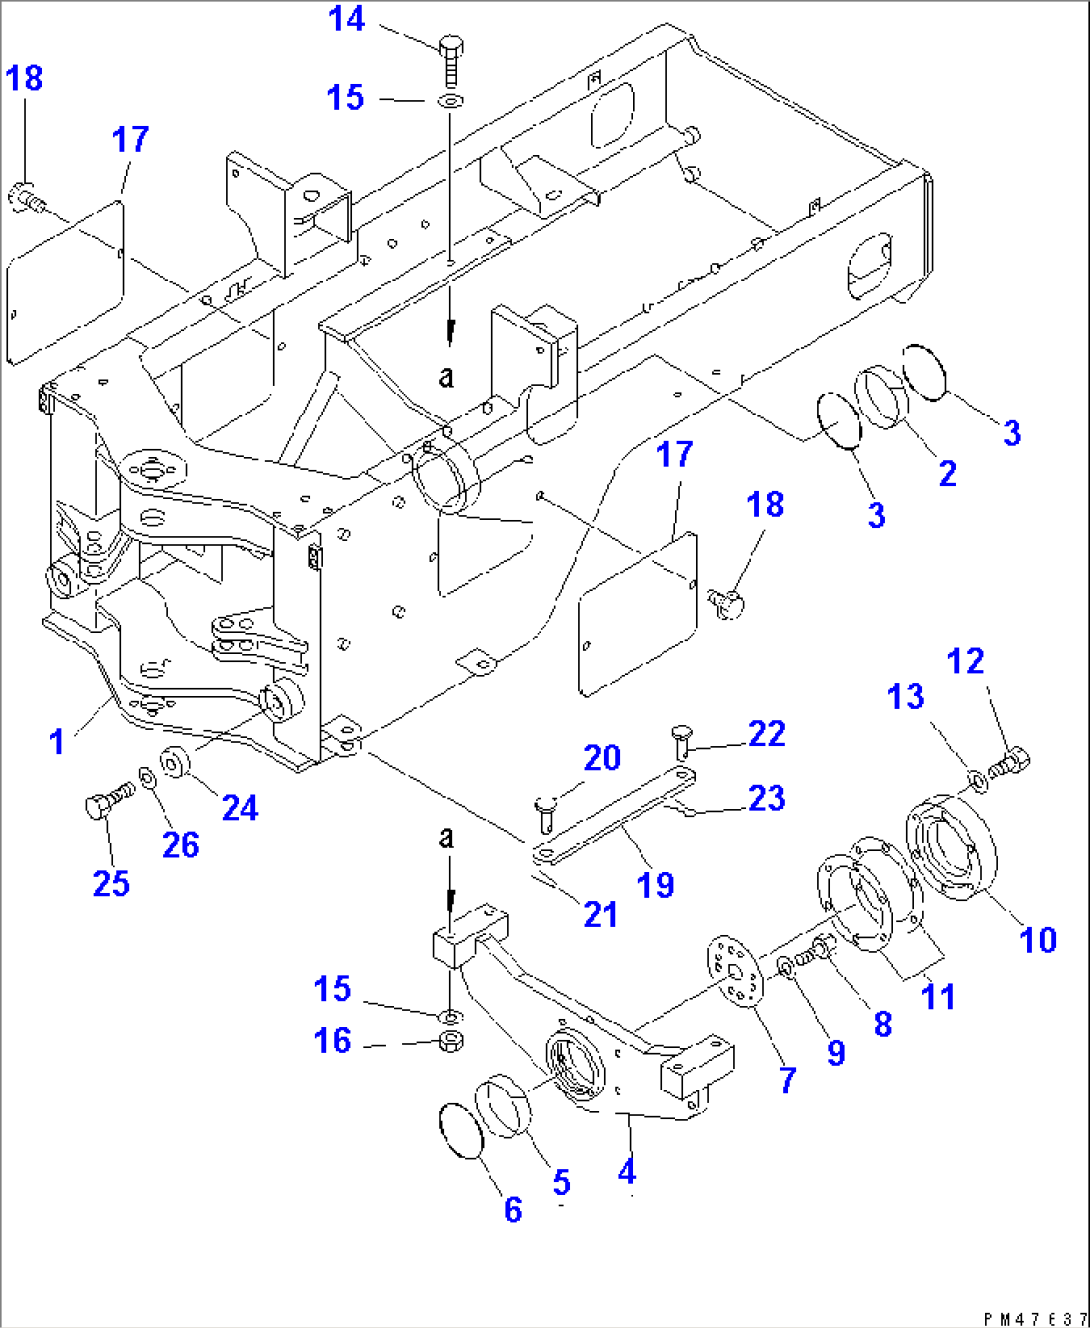 REAR FRAME (WITH MULTI COUPLER)(#60001-)